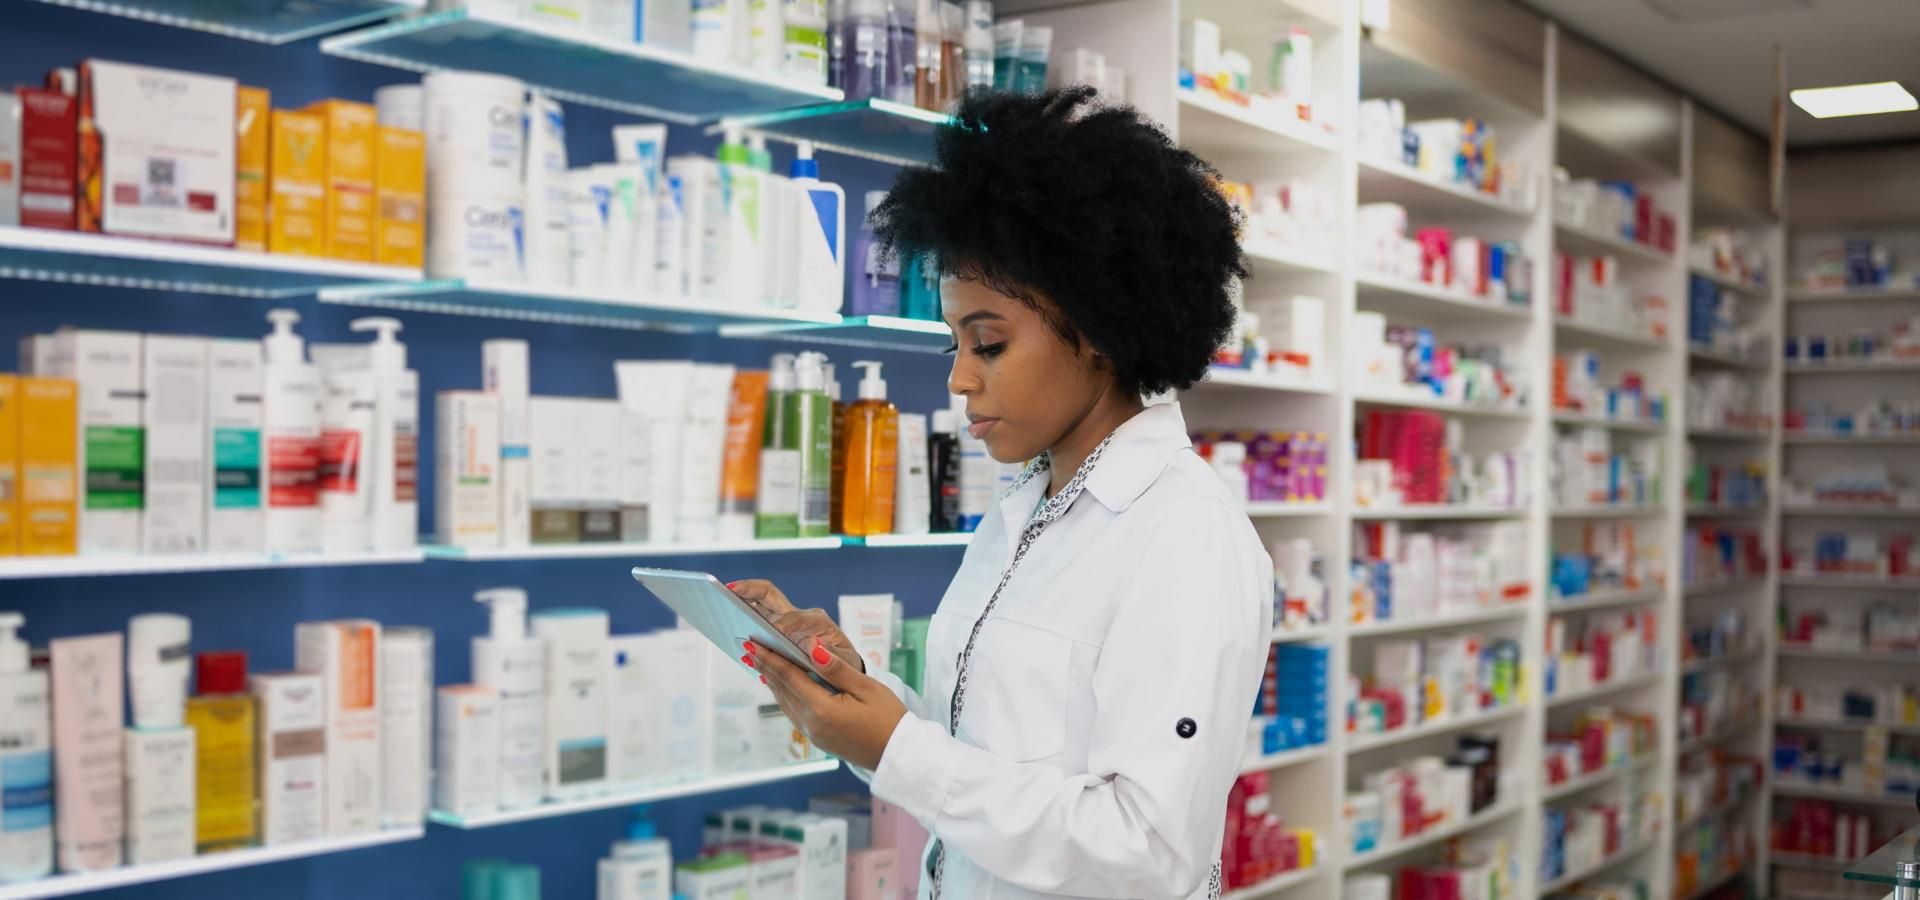 Pharmacy automation:
top 5 solutions & smart technologies to adopt